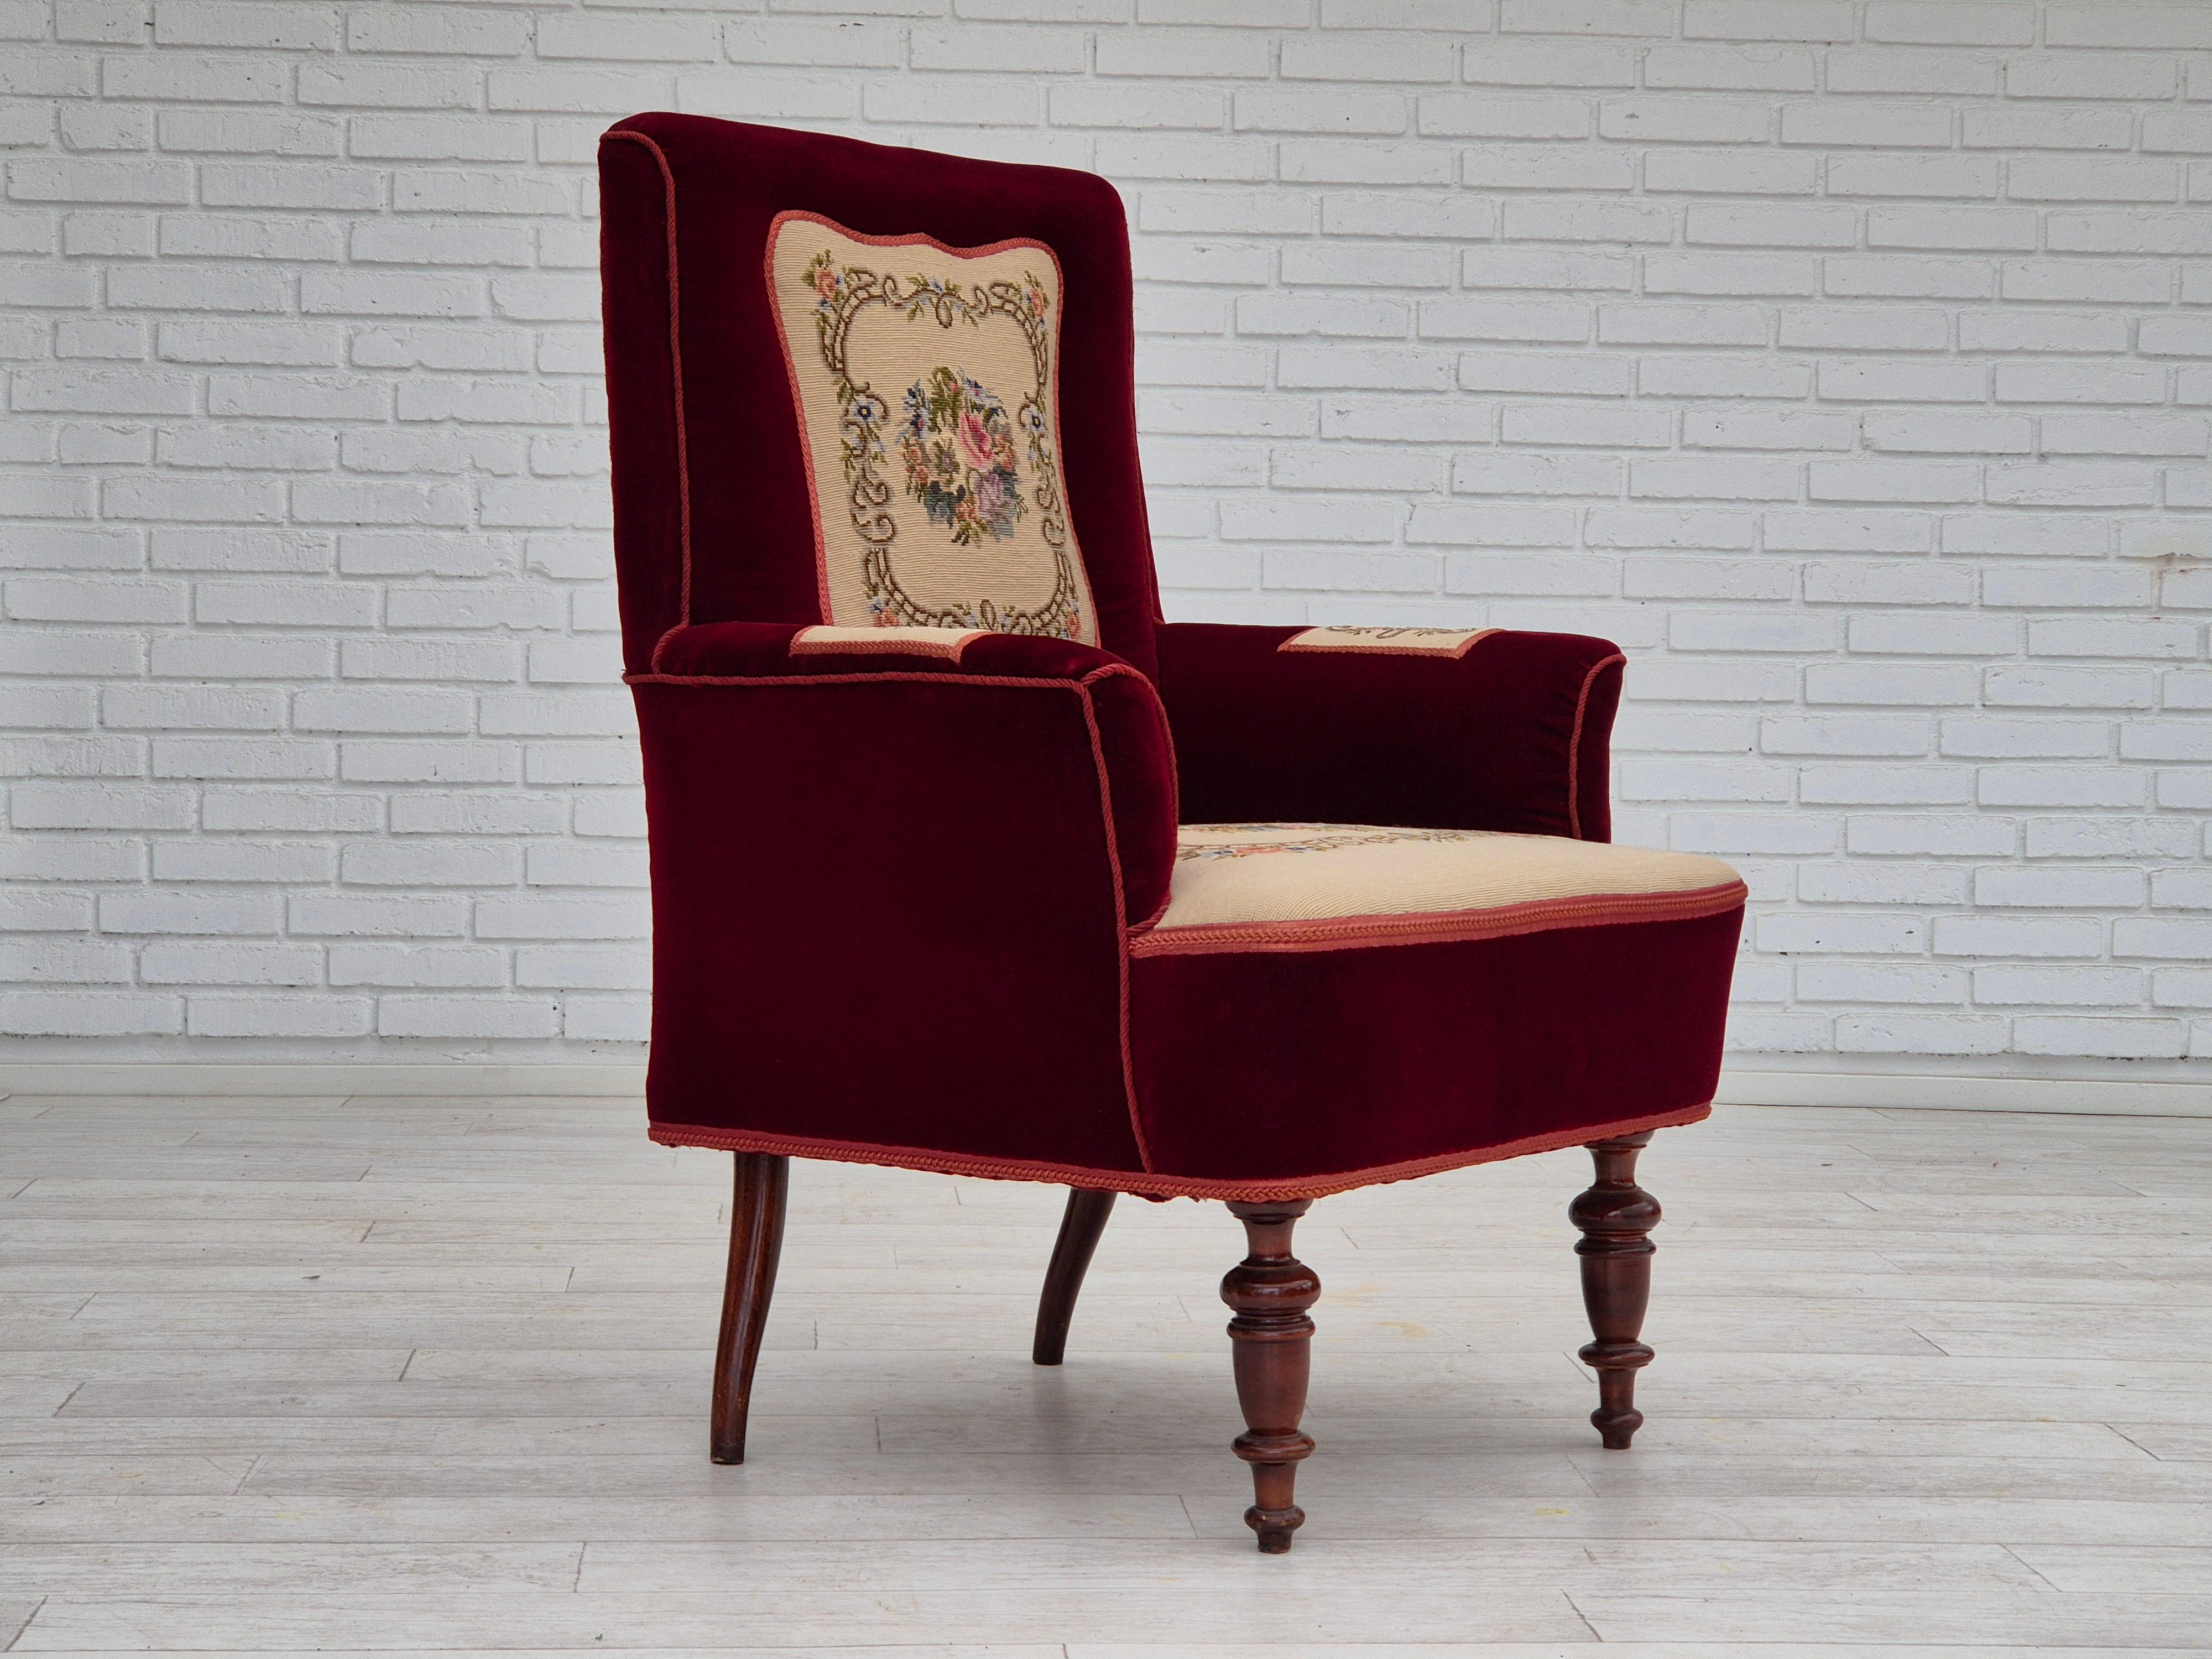 1950s, Danish handcrafted highback armchair in original very good condition. Cherry-red furniture velour with hand-sewn, woven patches in wool. Danish craftsmanship, probably from West Jutland. Beech wood legs, springs in the seat. Manufactured in